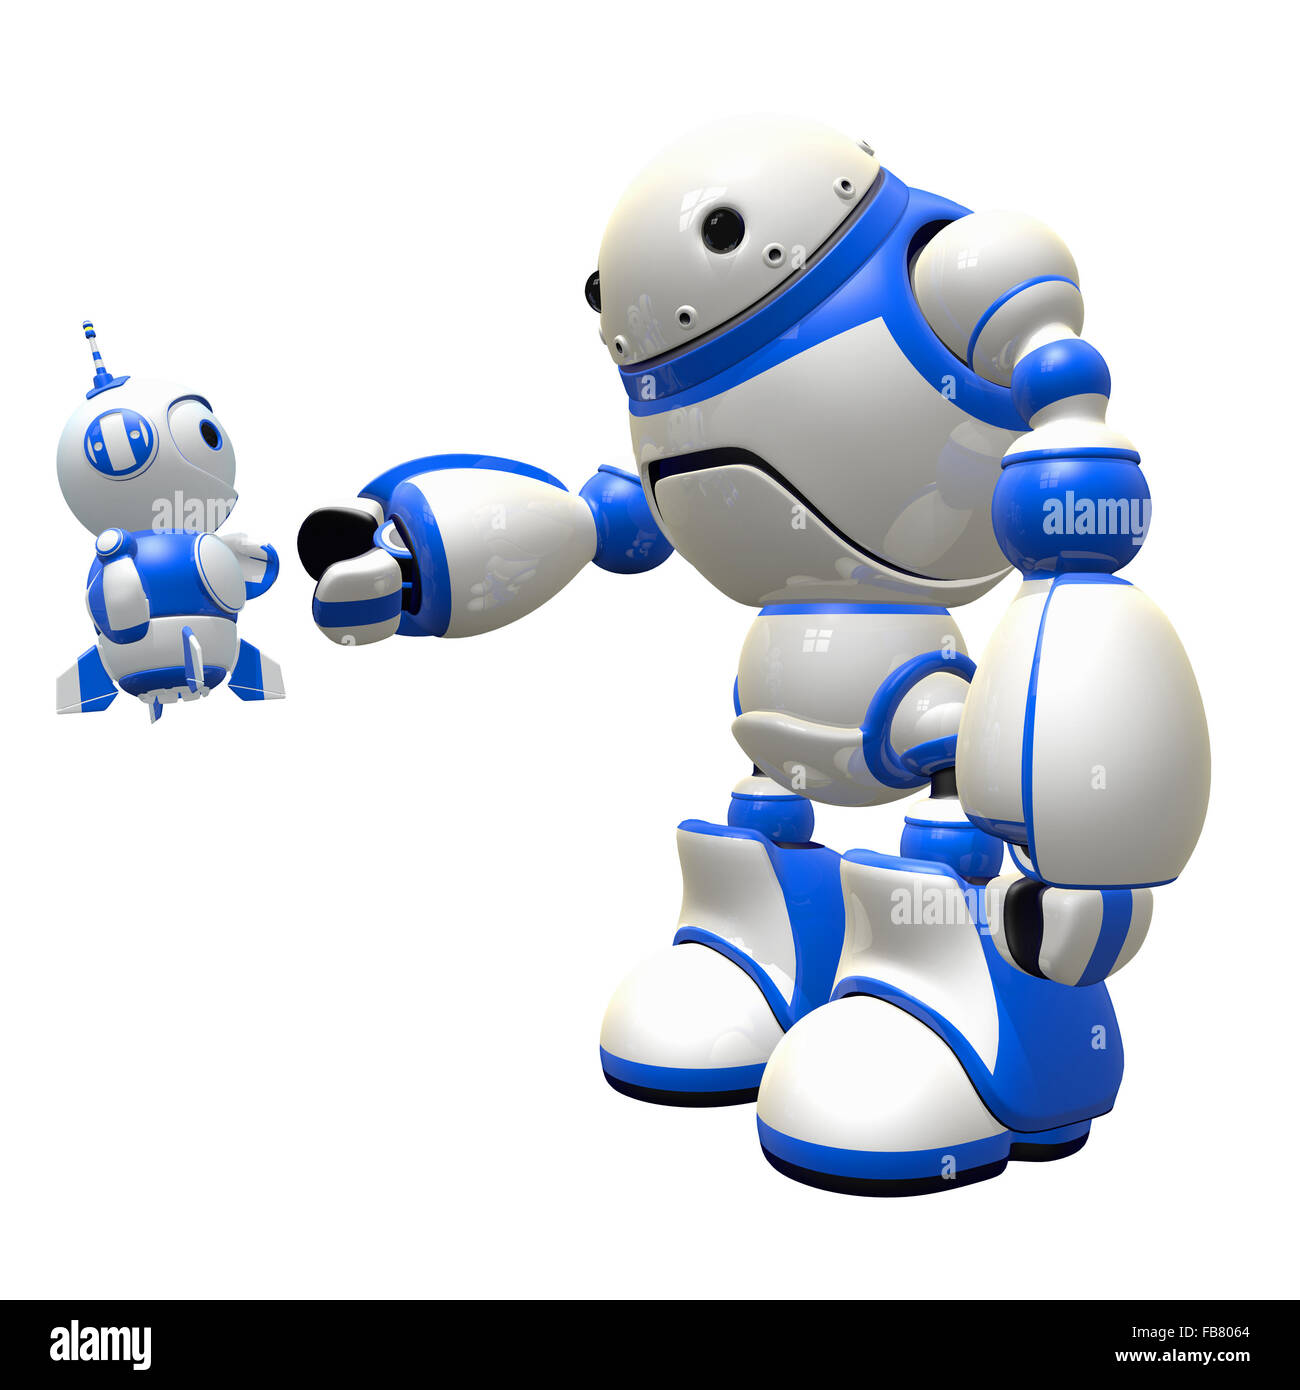 Little robot and big robot shaking hands and becoming friends. Isn't it cute?. Stock Photo